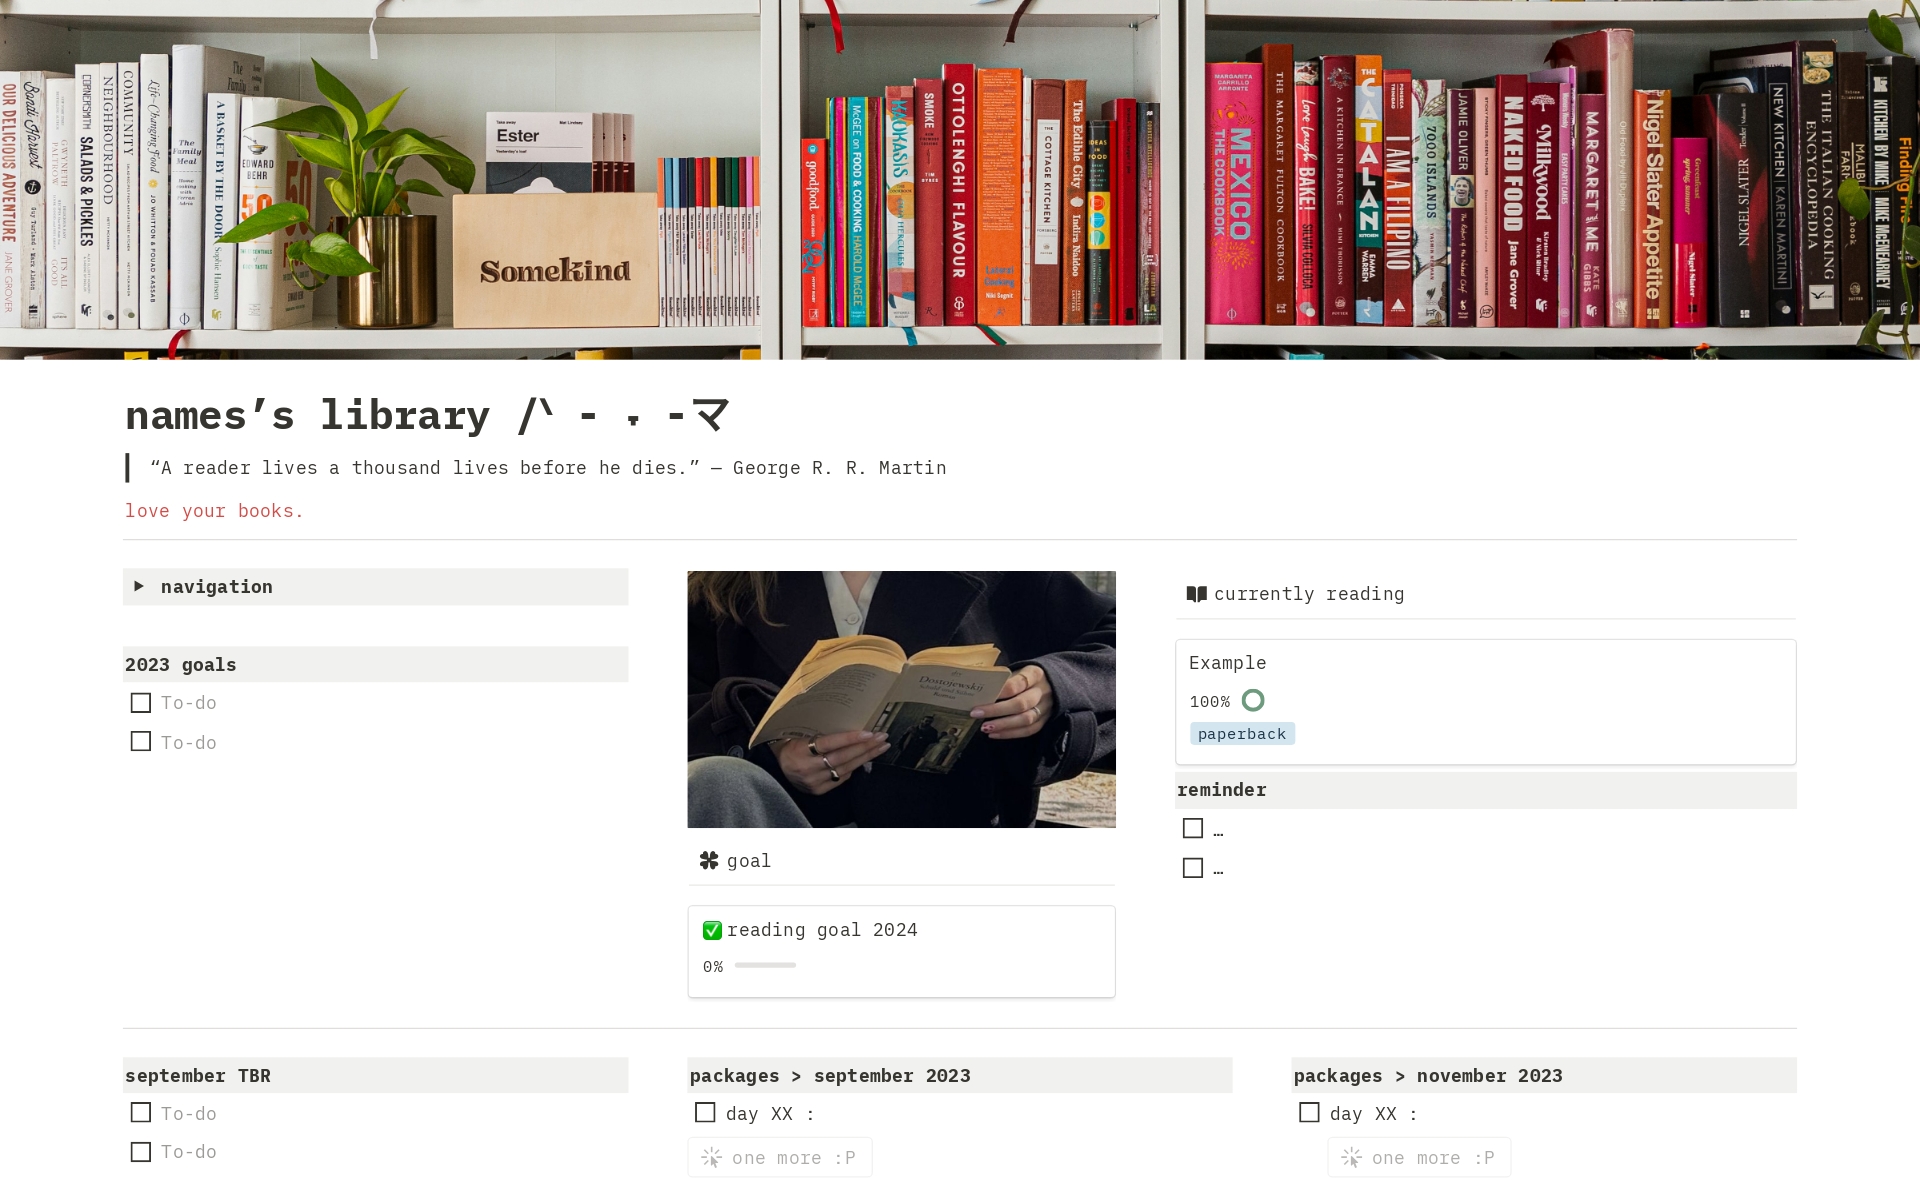 Organize your library, track your readings, and achieve your literary goals with ease. This template offers a customizable library, a reading tracker, and goal-setting features.